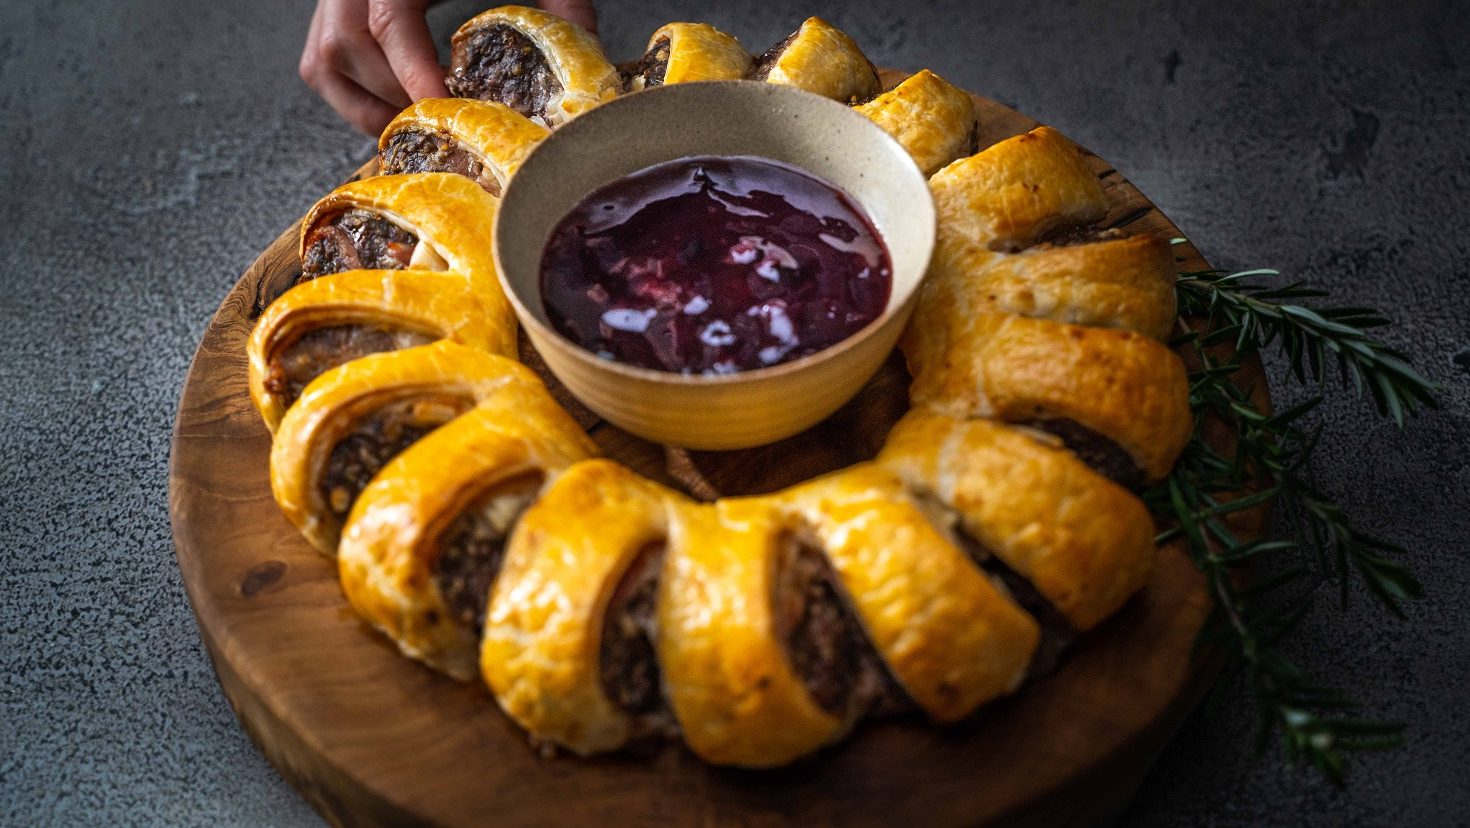 A baked sausage roll ring with a bowl of purple dipping sauce in the middle on round wooden board. A hand is grabbing one portion.